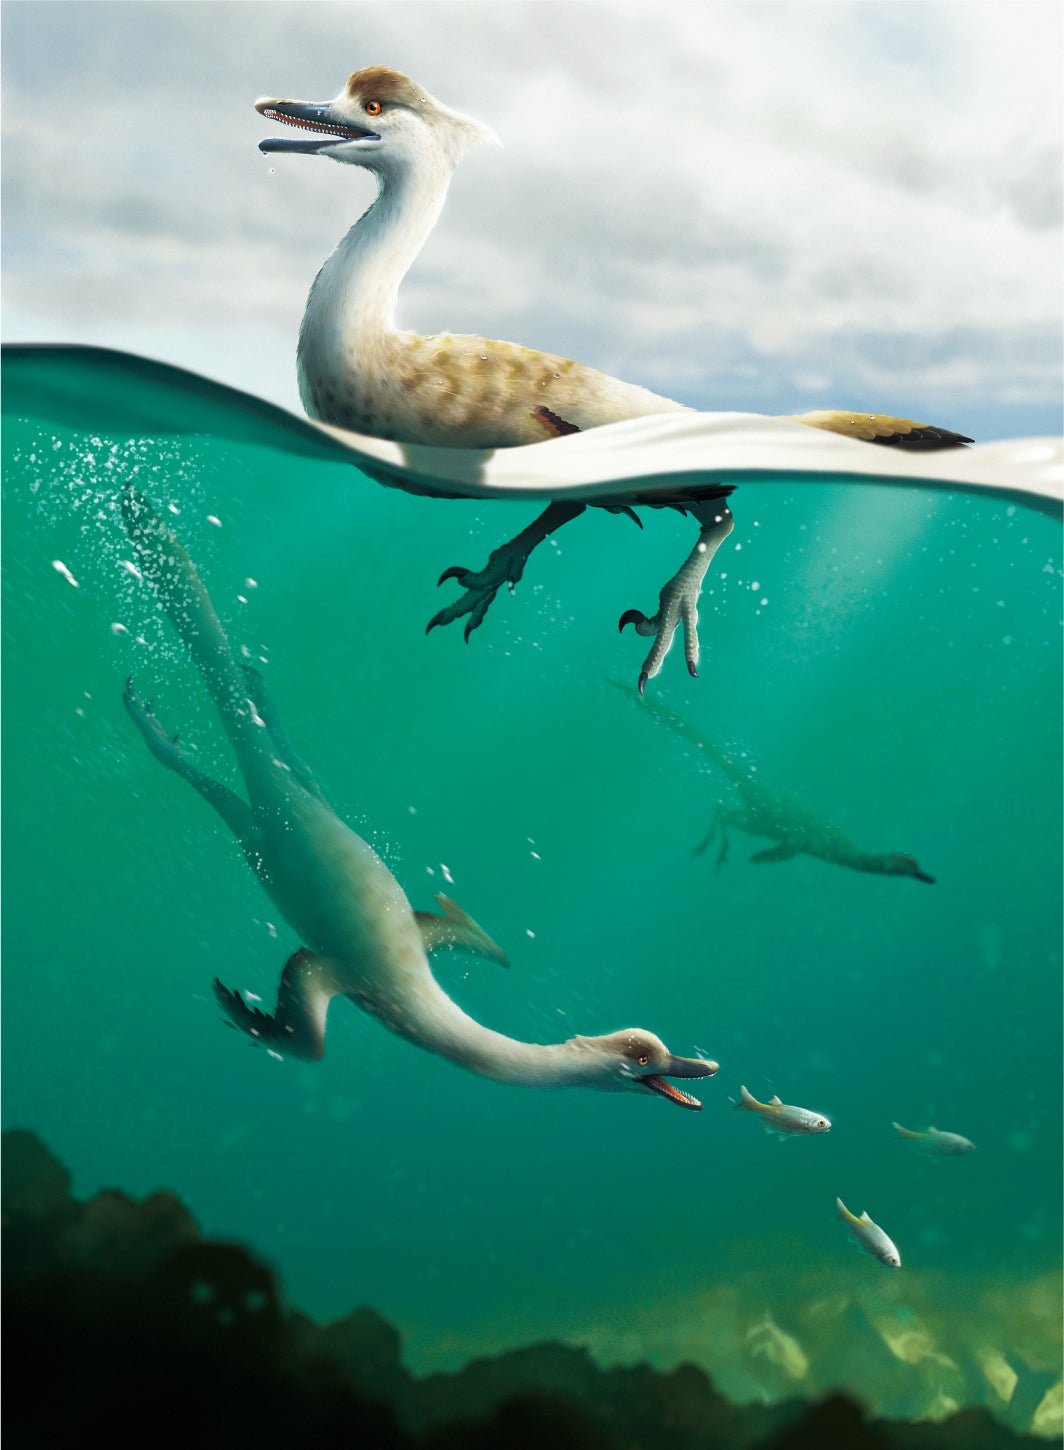 An illustration of the recently discovered species. (Illustration: Yusik Choi.)